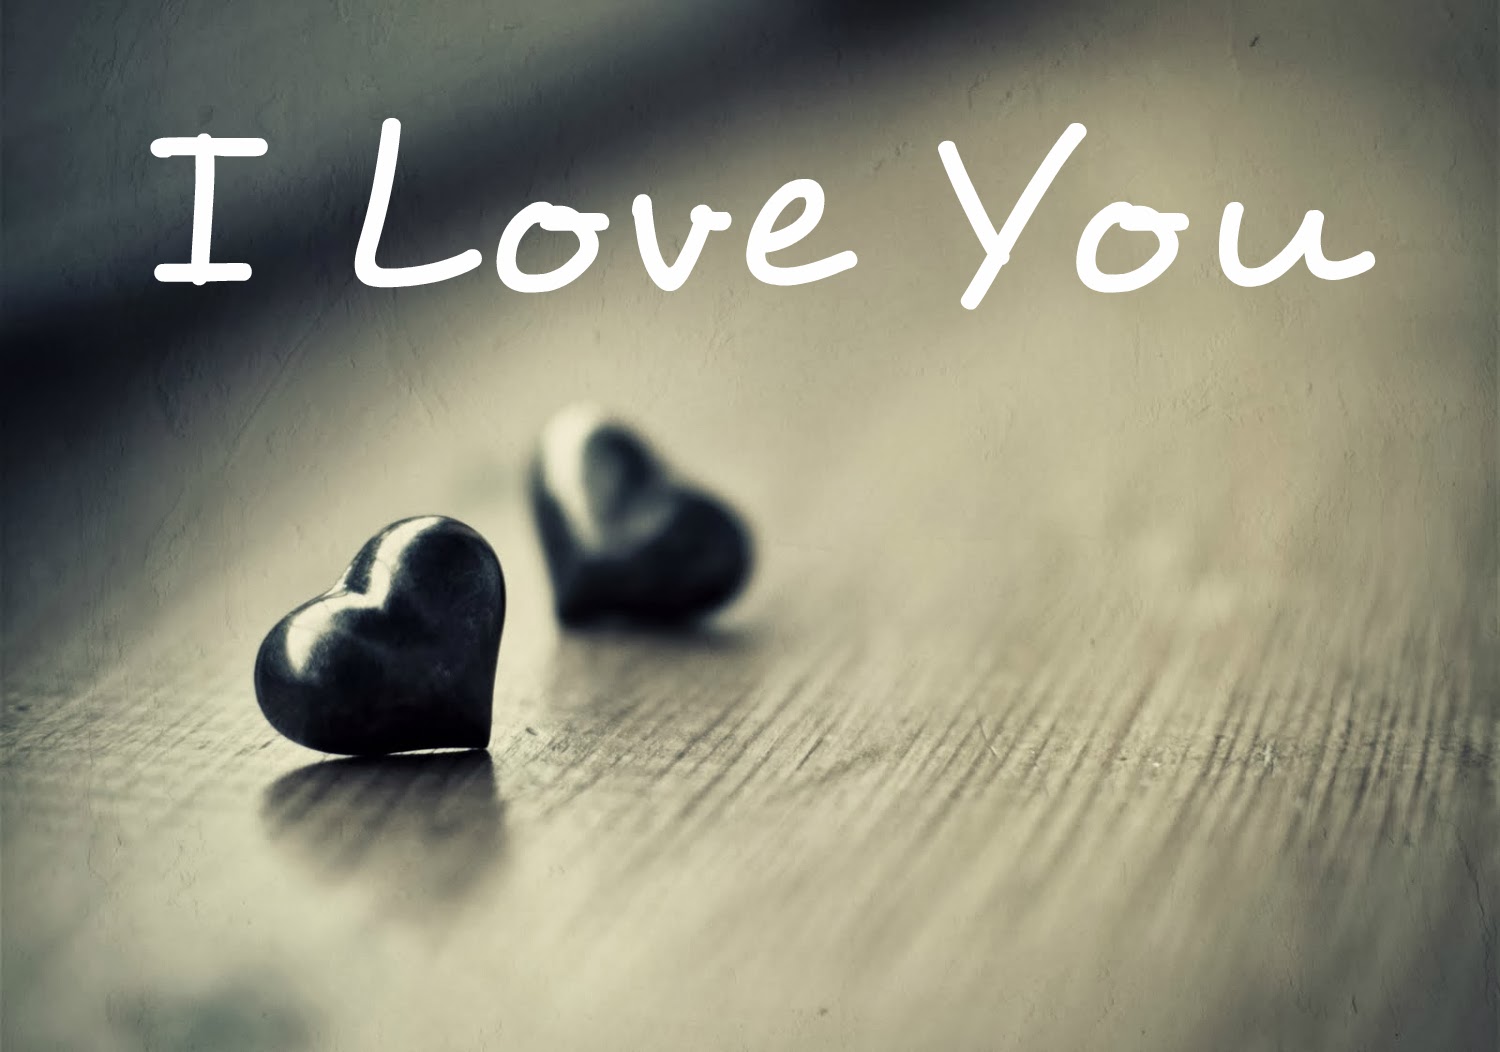 I Love You Wallpapers HD A39